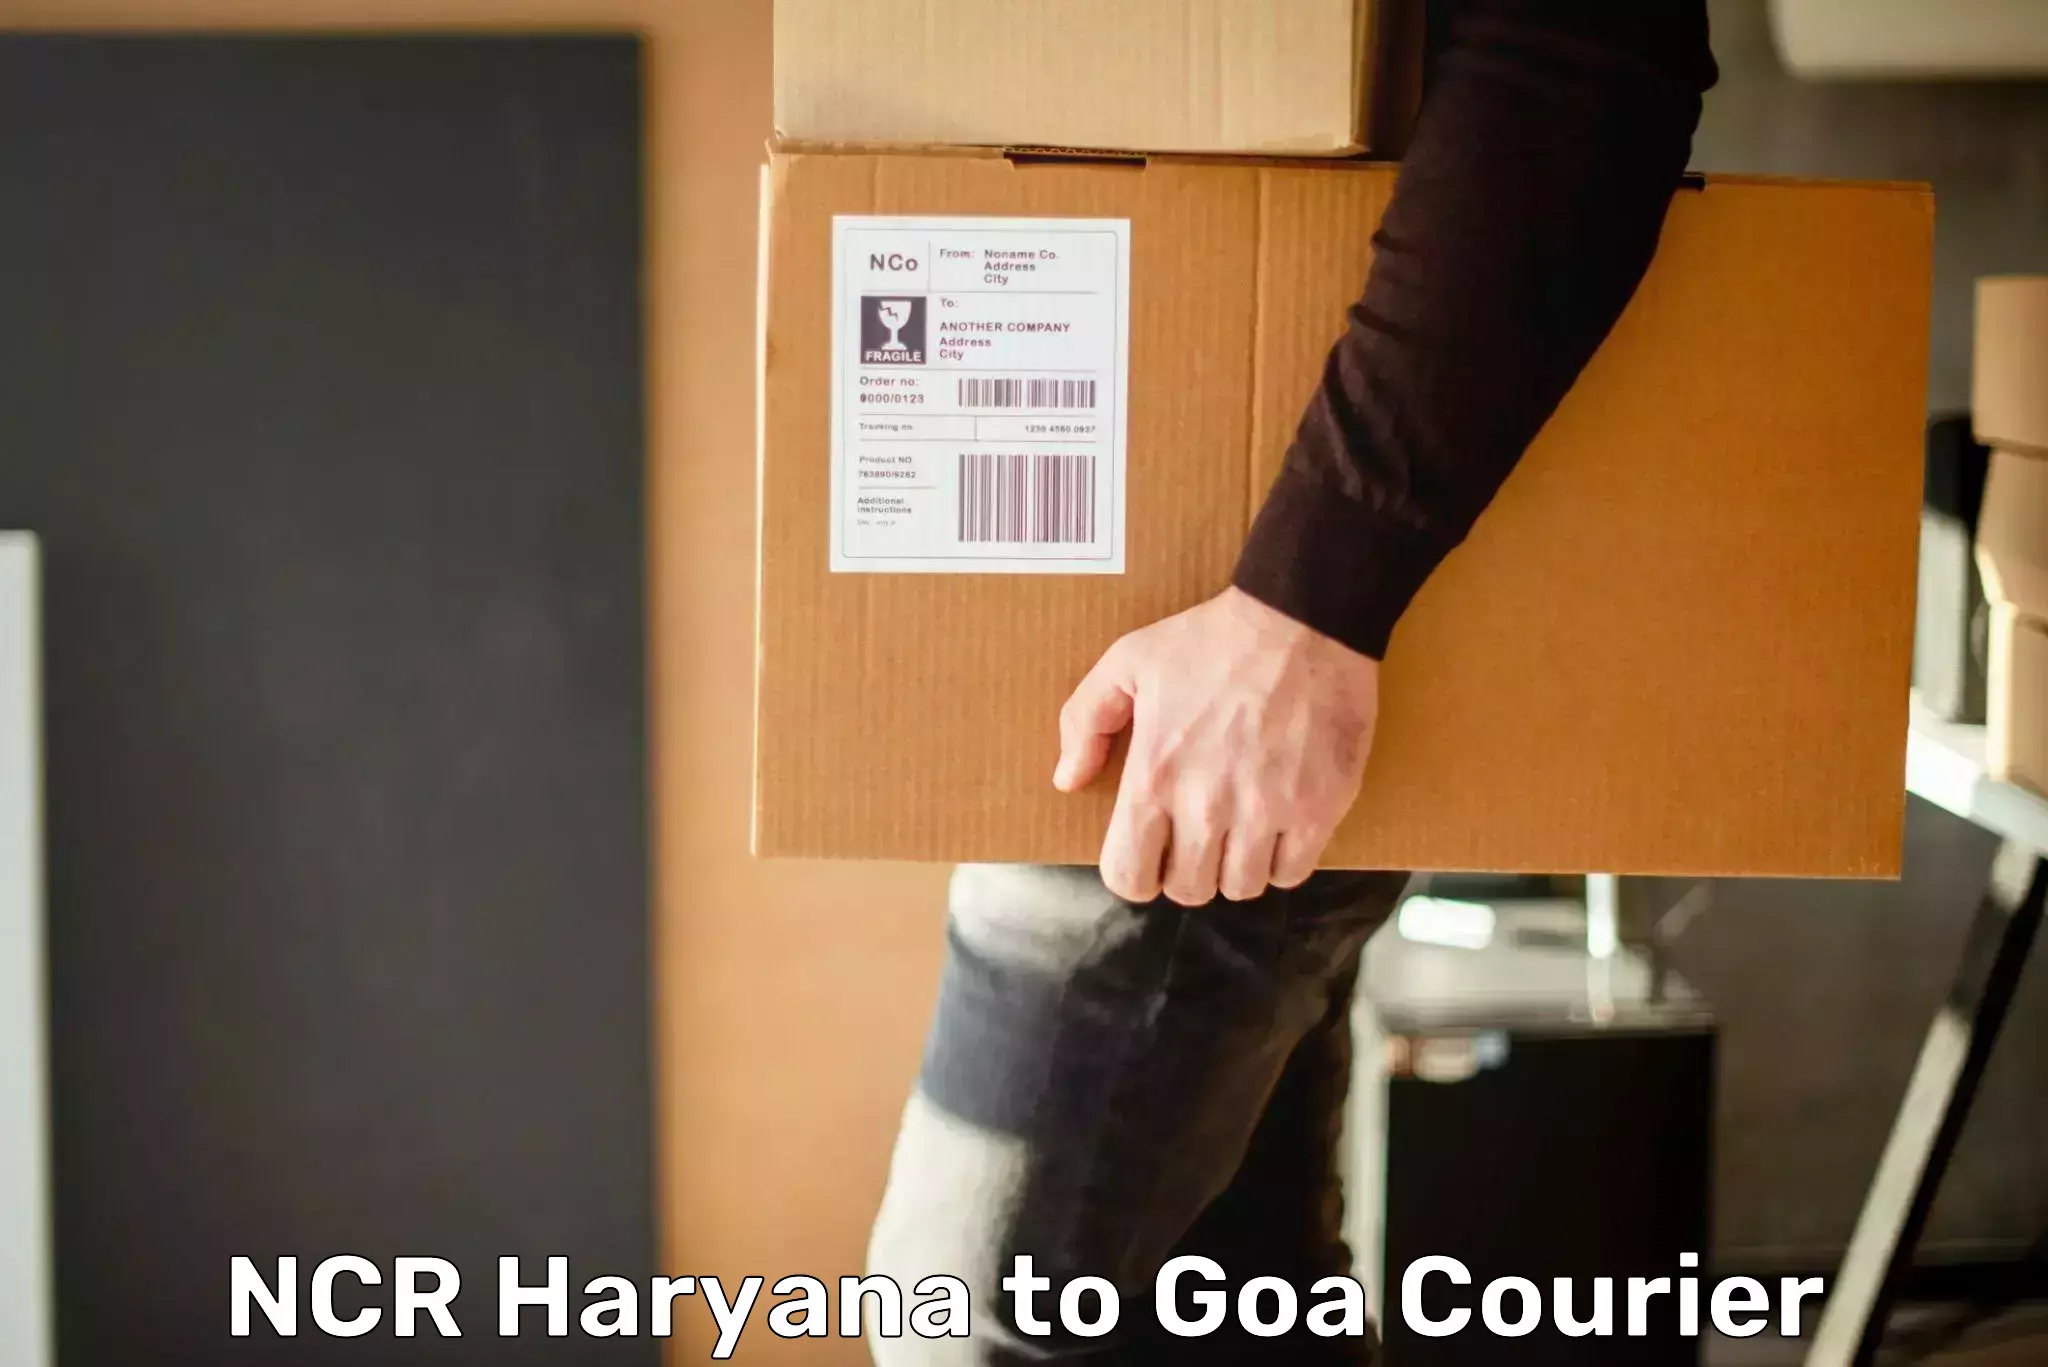 Efficient order fulfillment in NCR Haryana to Goa